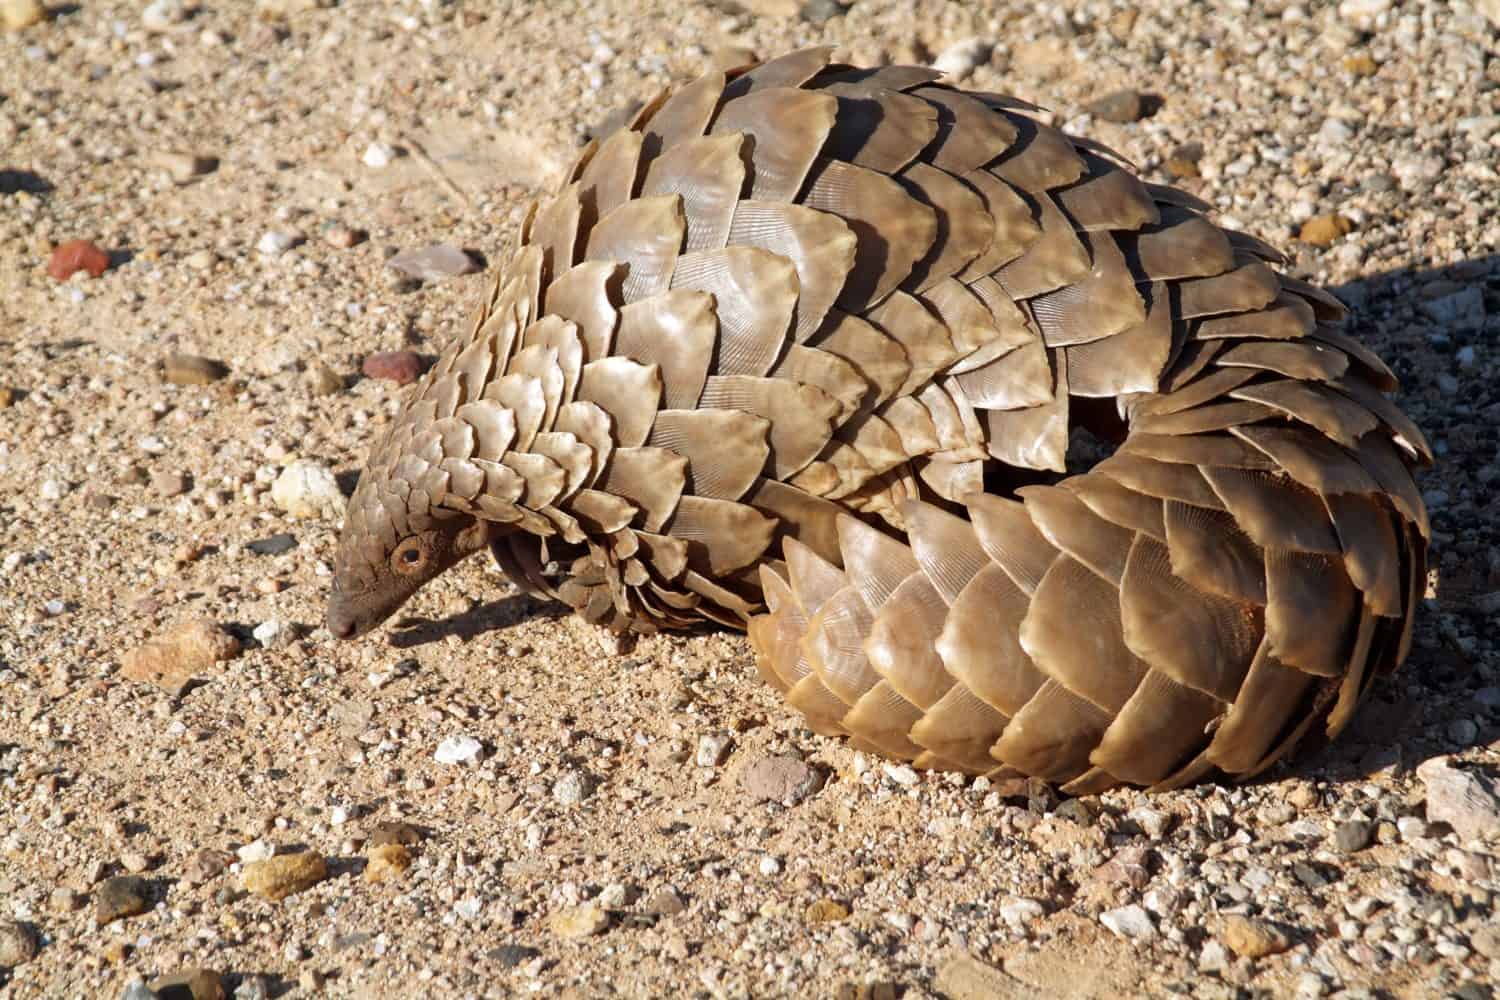 A Pangolin in the Northern Cape region of South Africa Sometimes called an Anteater